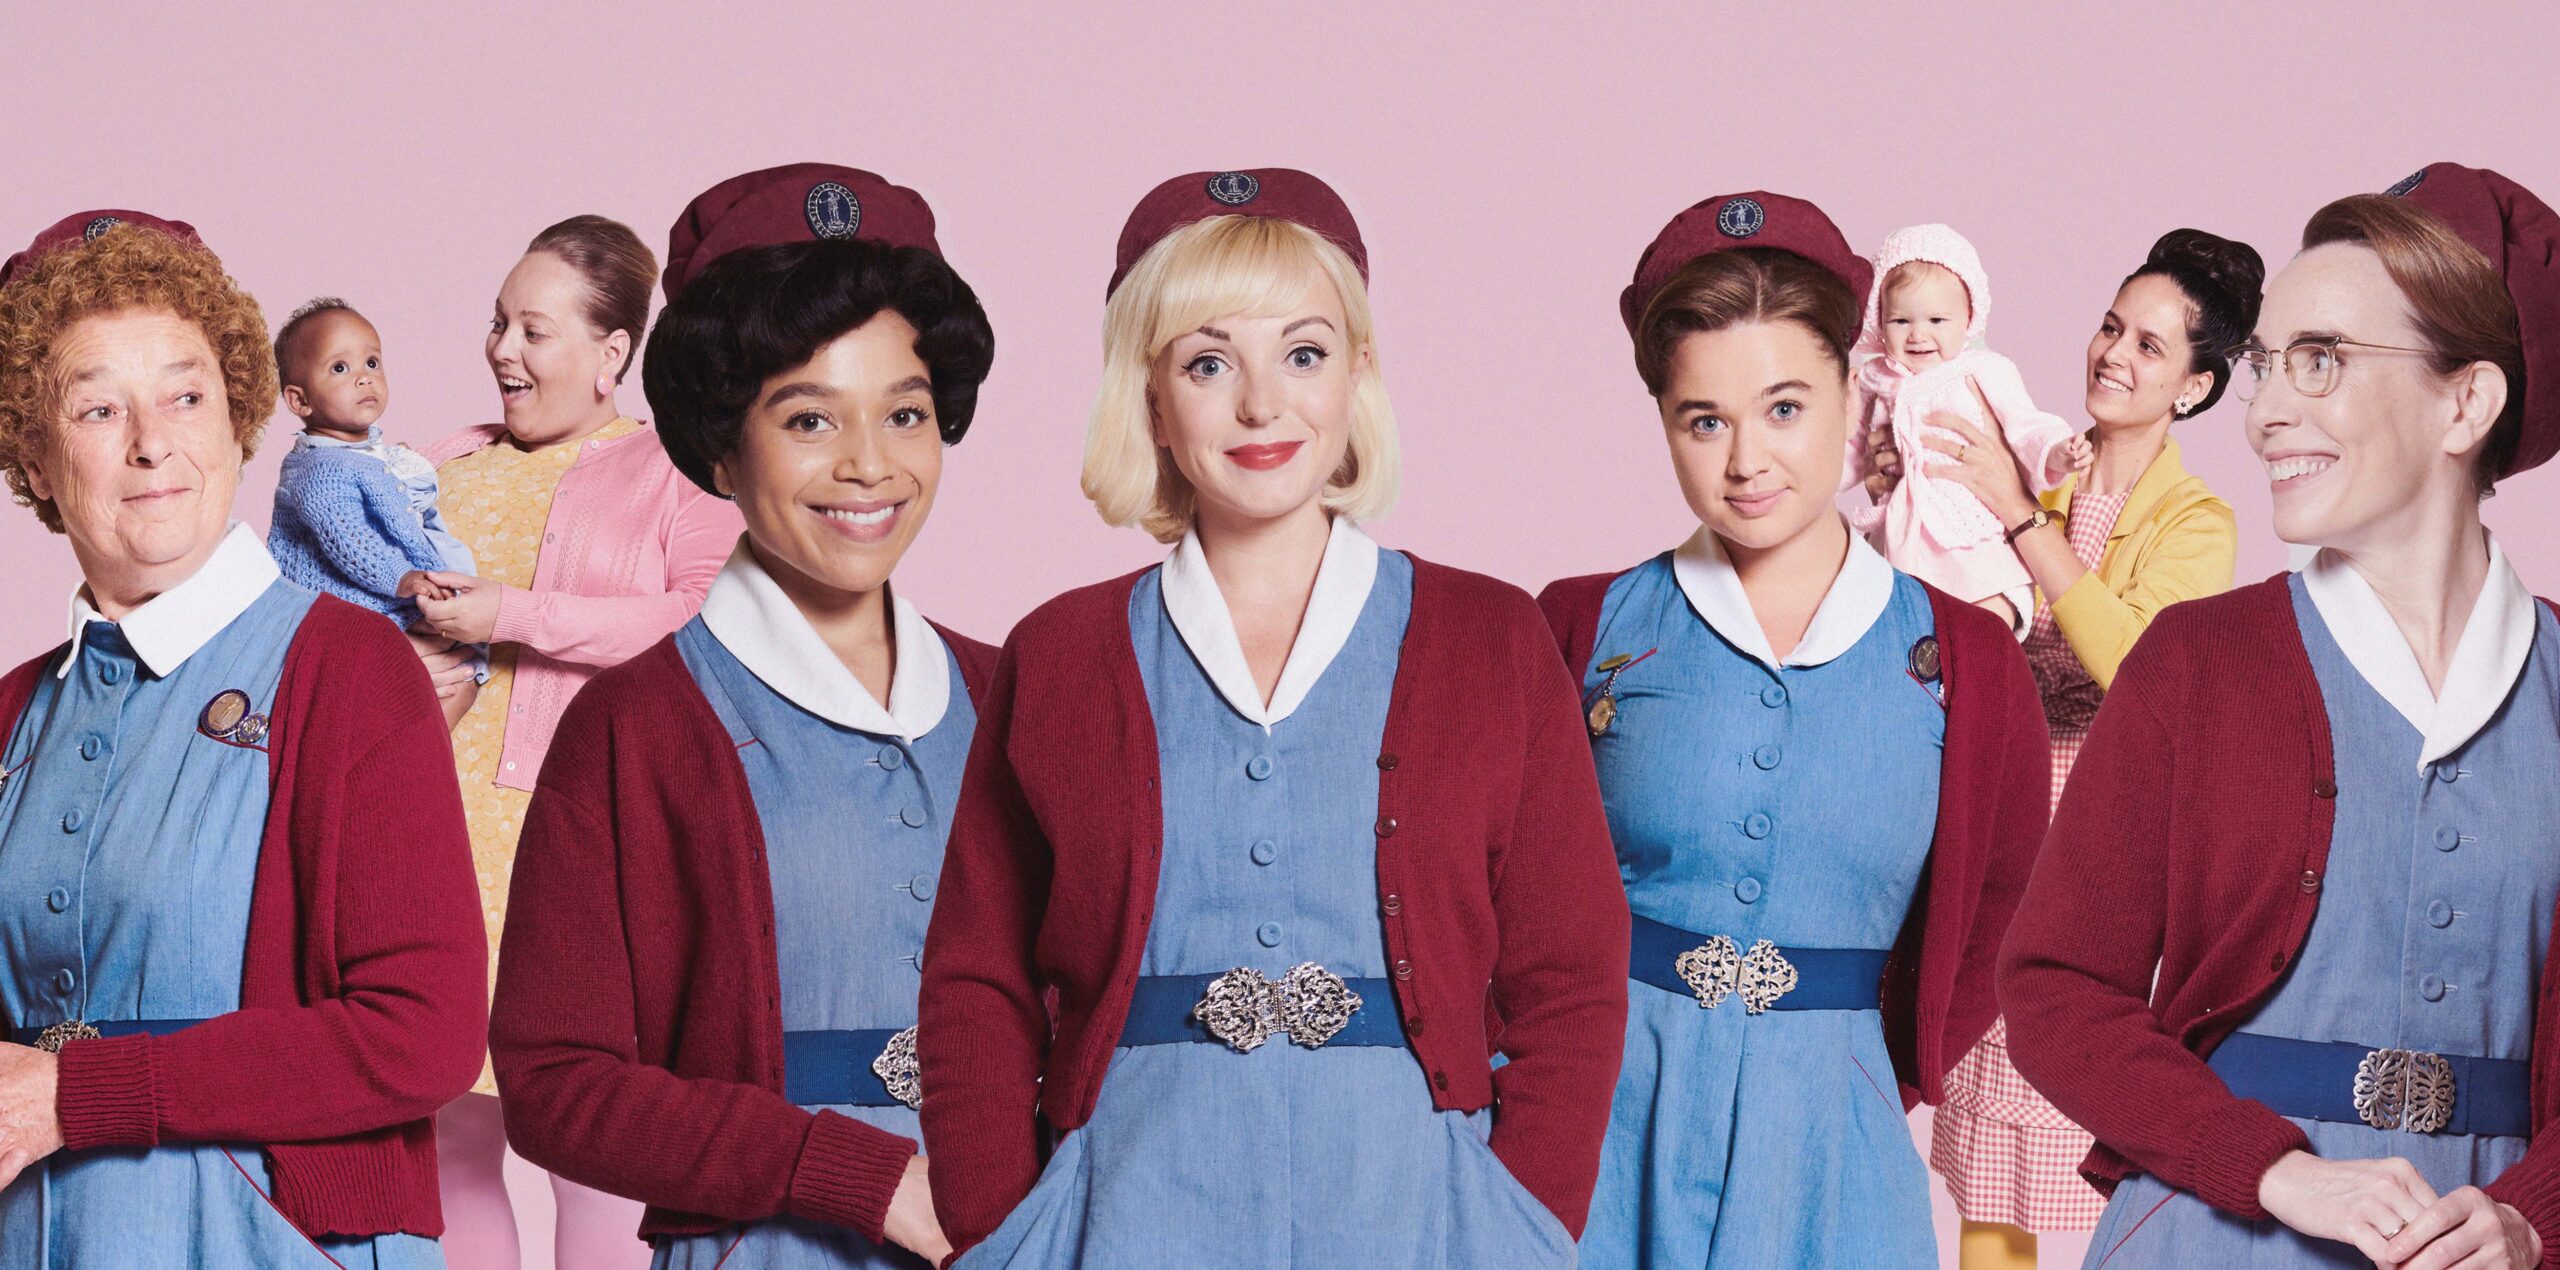 call the midwife season 14 release date